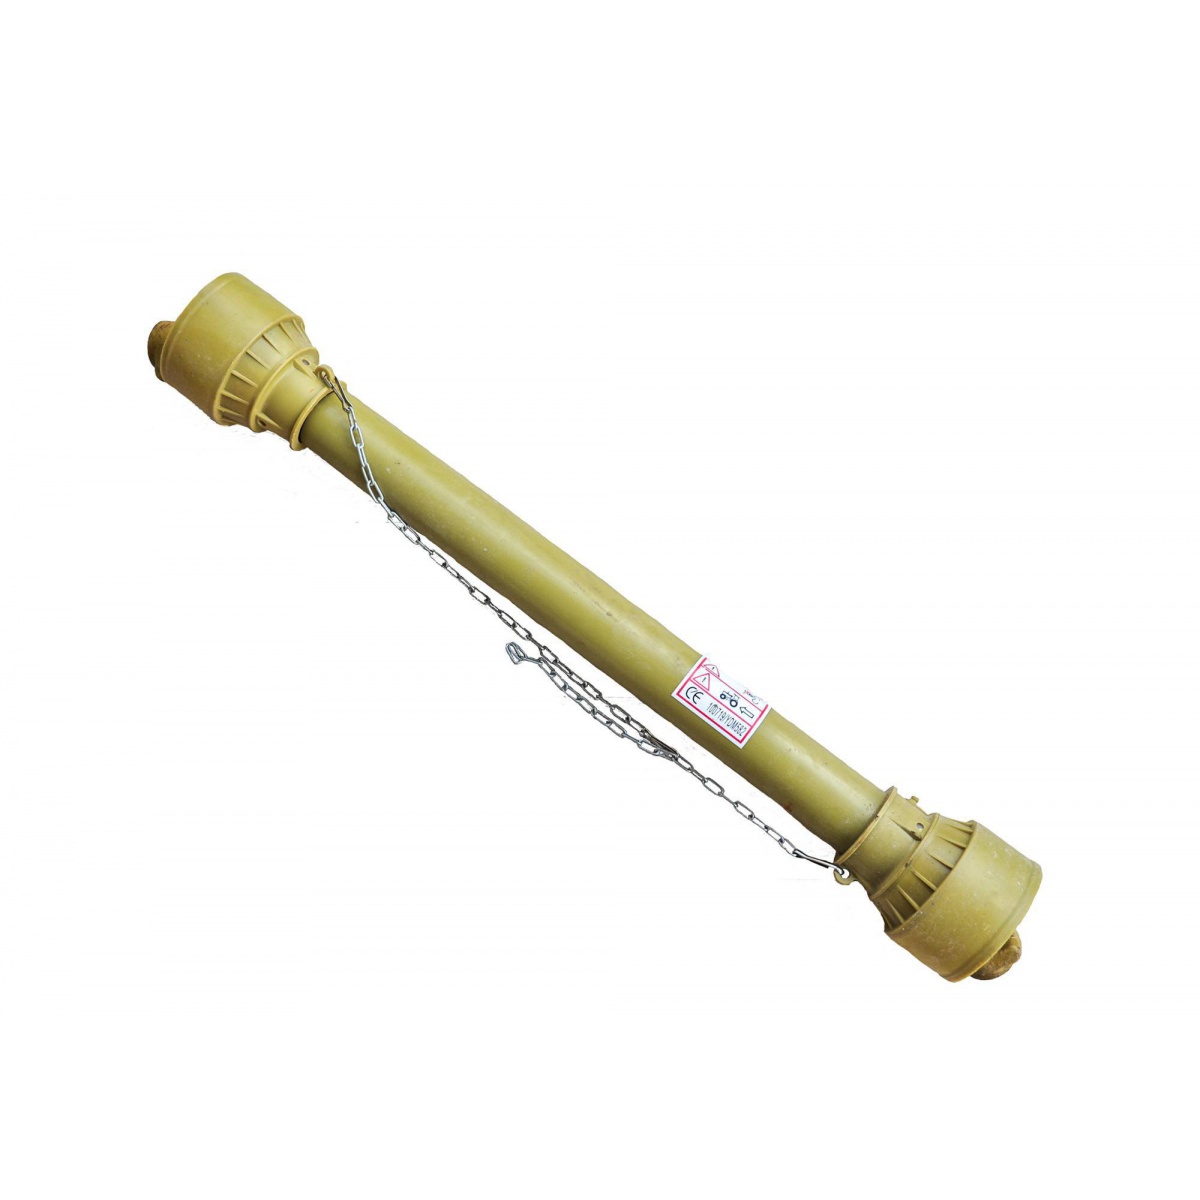 PTO shaft 025B - 60cm / up to 24 HP